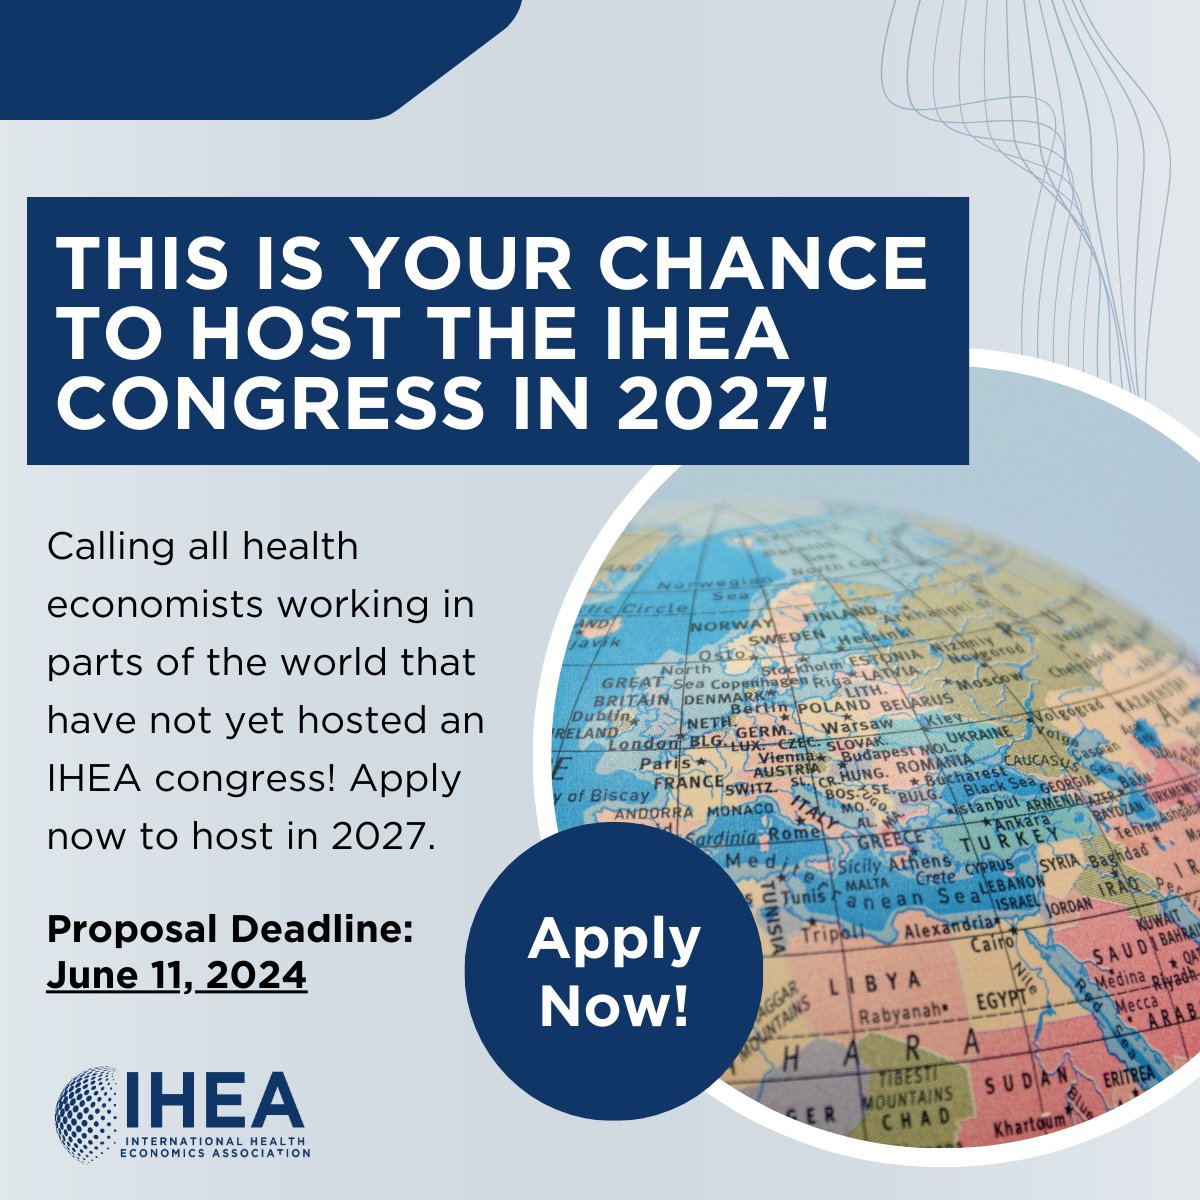 IHEA has just released its call for expressions of interest in hosting the 2027 World Congress on Health Economics, and we're eager to receive proposals from underrepresented regions. If you're interested, you can find more details here: healtheconomics.org/congress/